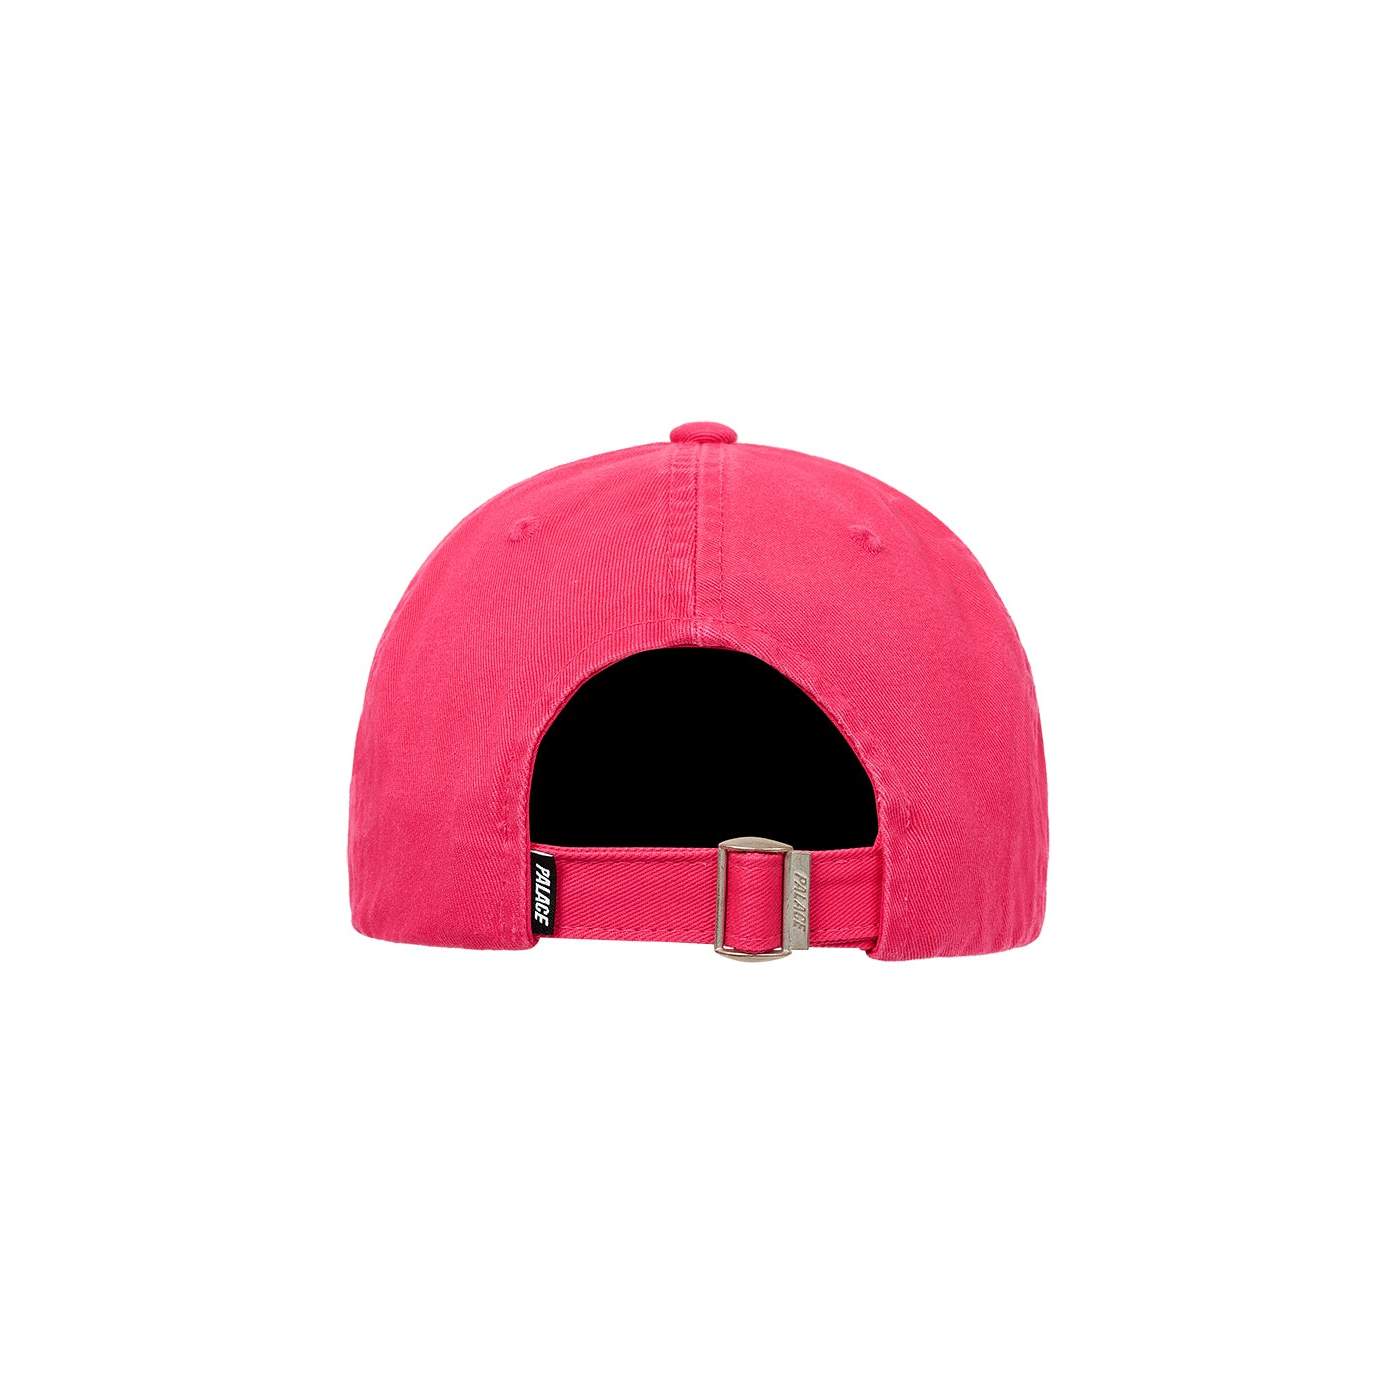 Thumbnail START UP PAL HAT PINK one color